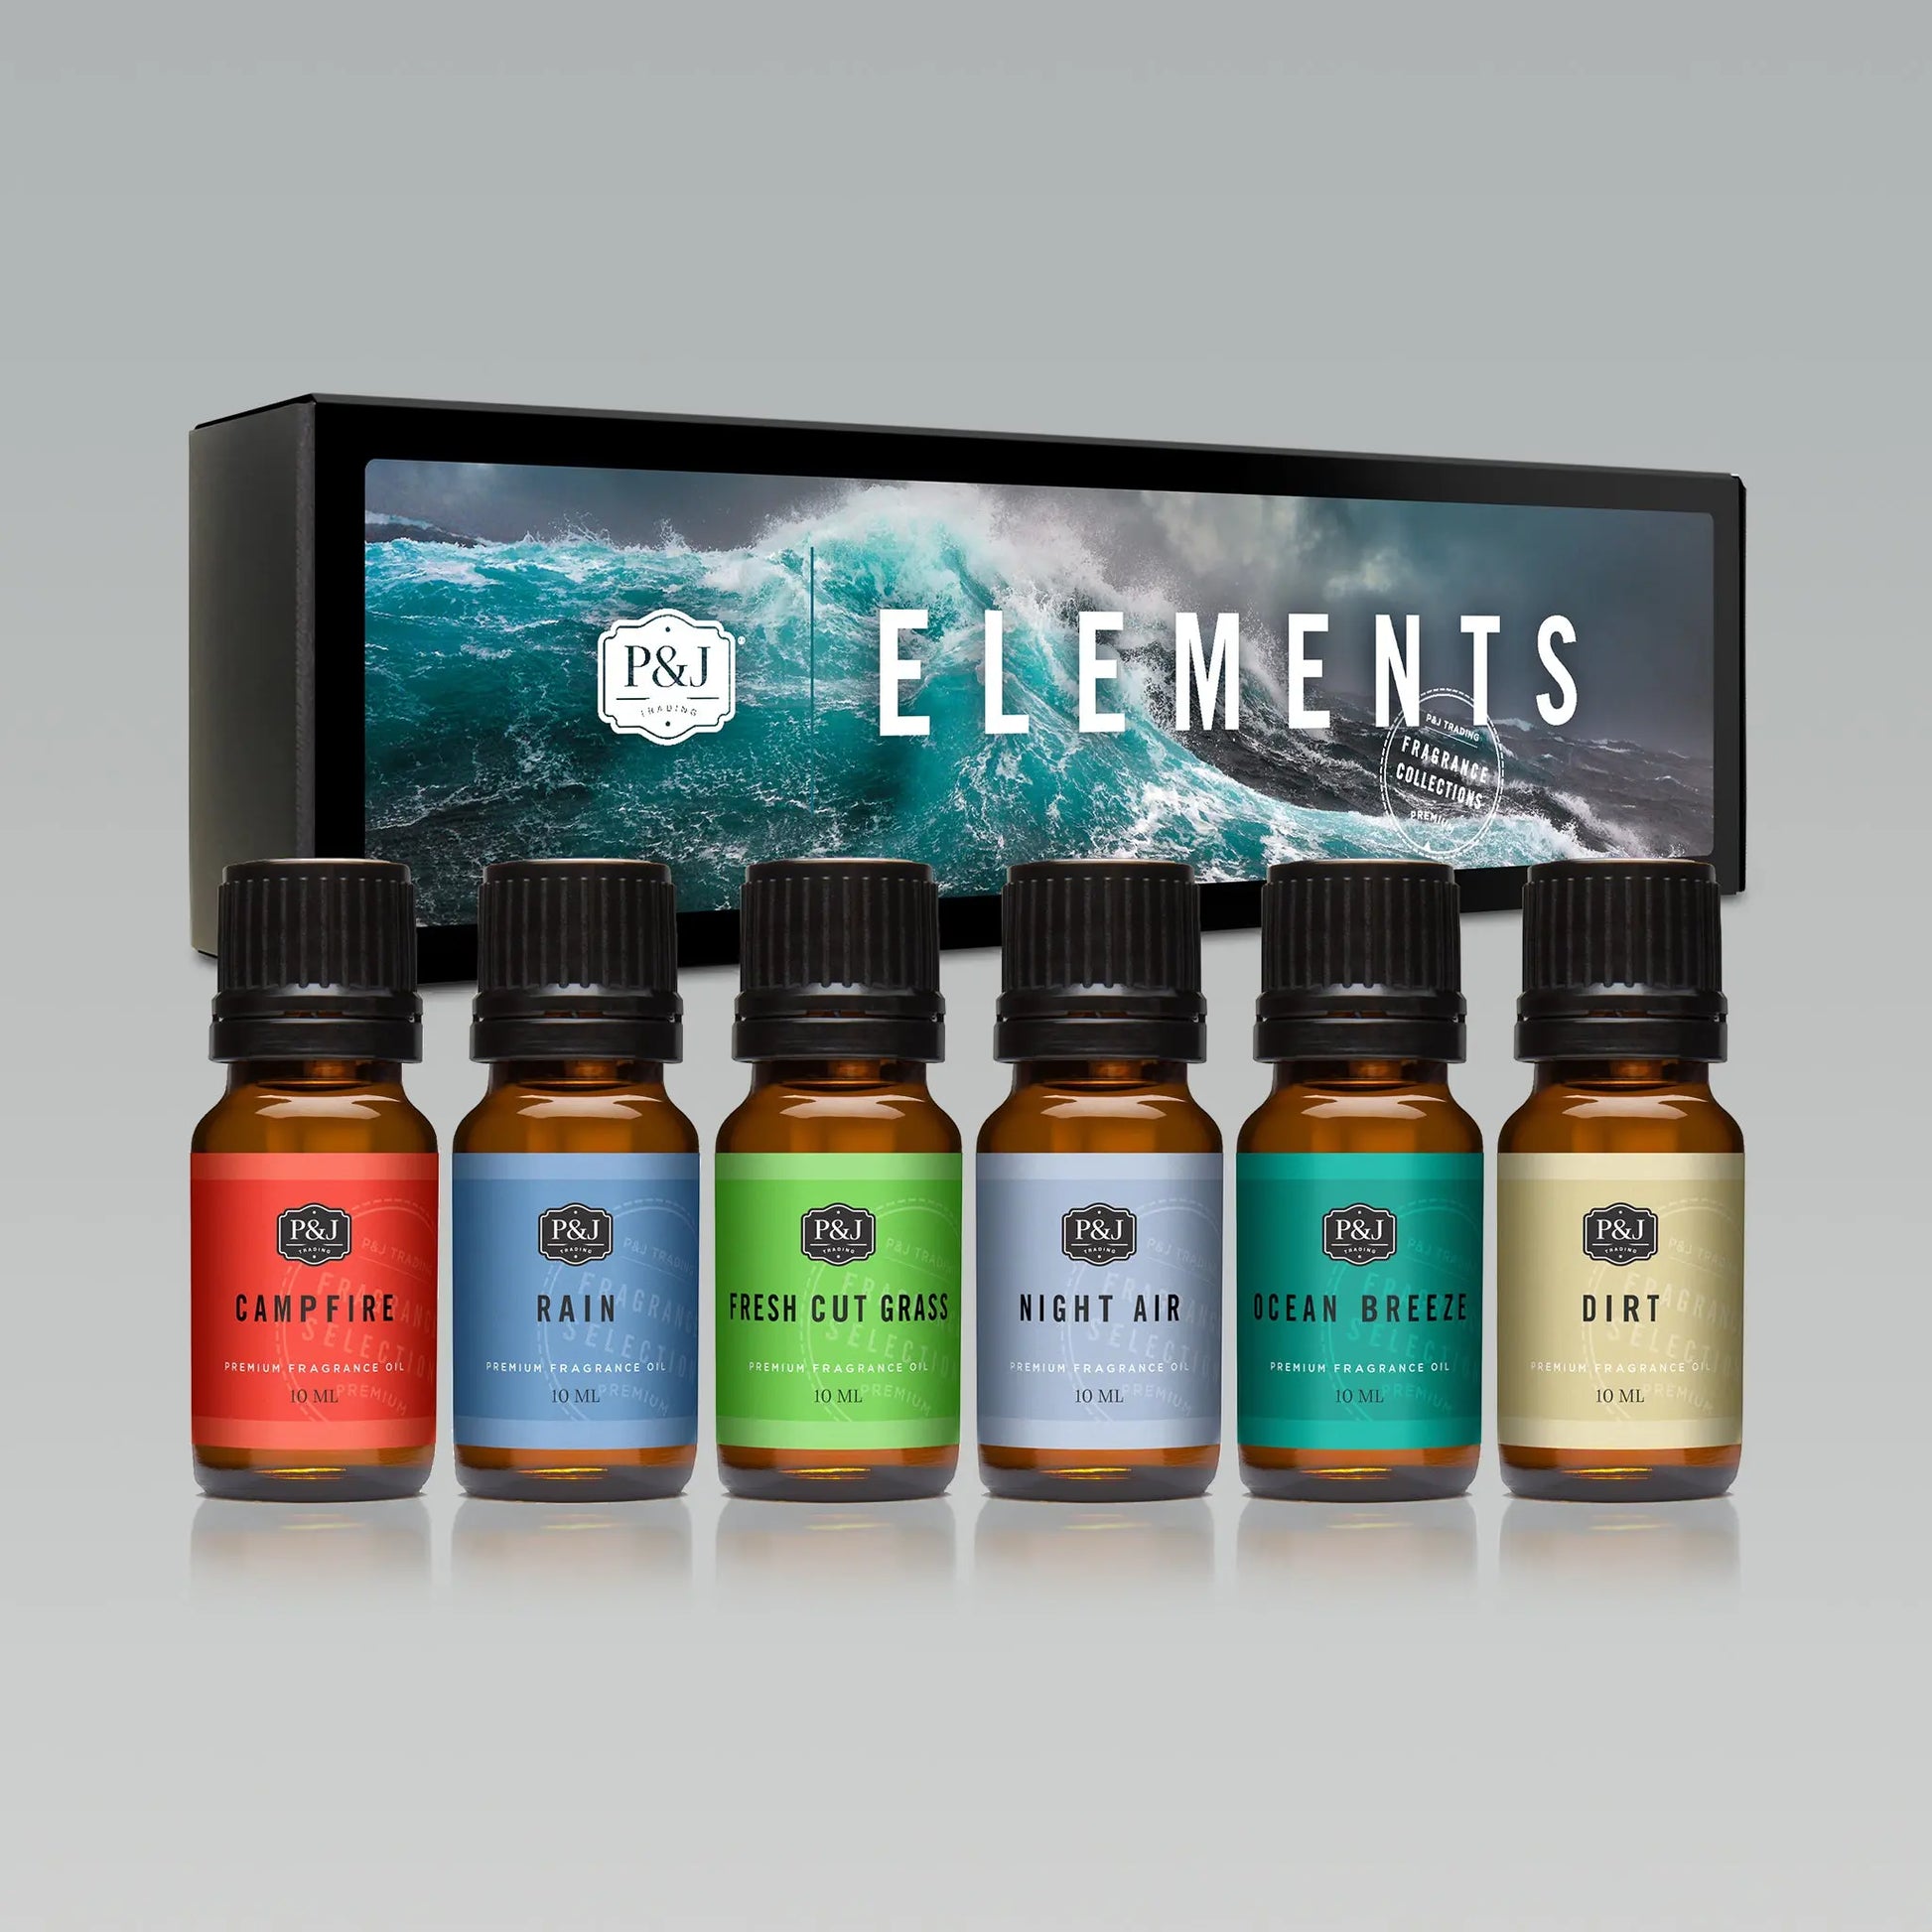 P&J Trading 10ml Premium Fragrance Oil Gift Set - Includes 6-10ml Scented  Oils for Relaxation